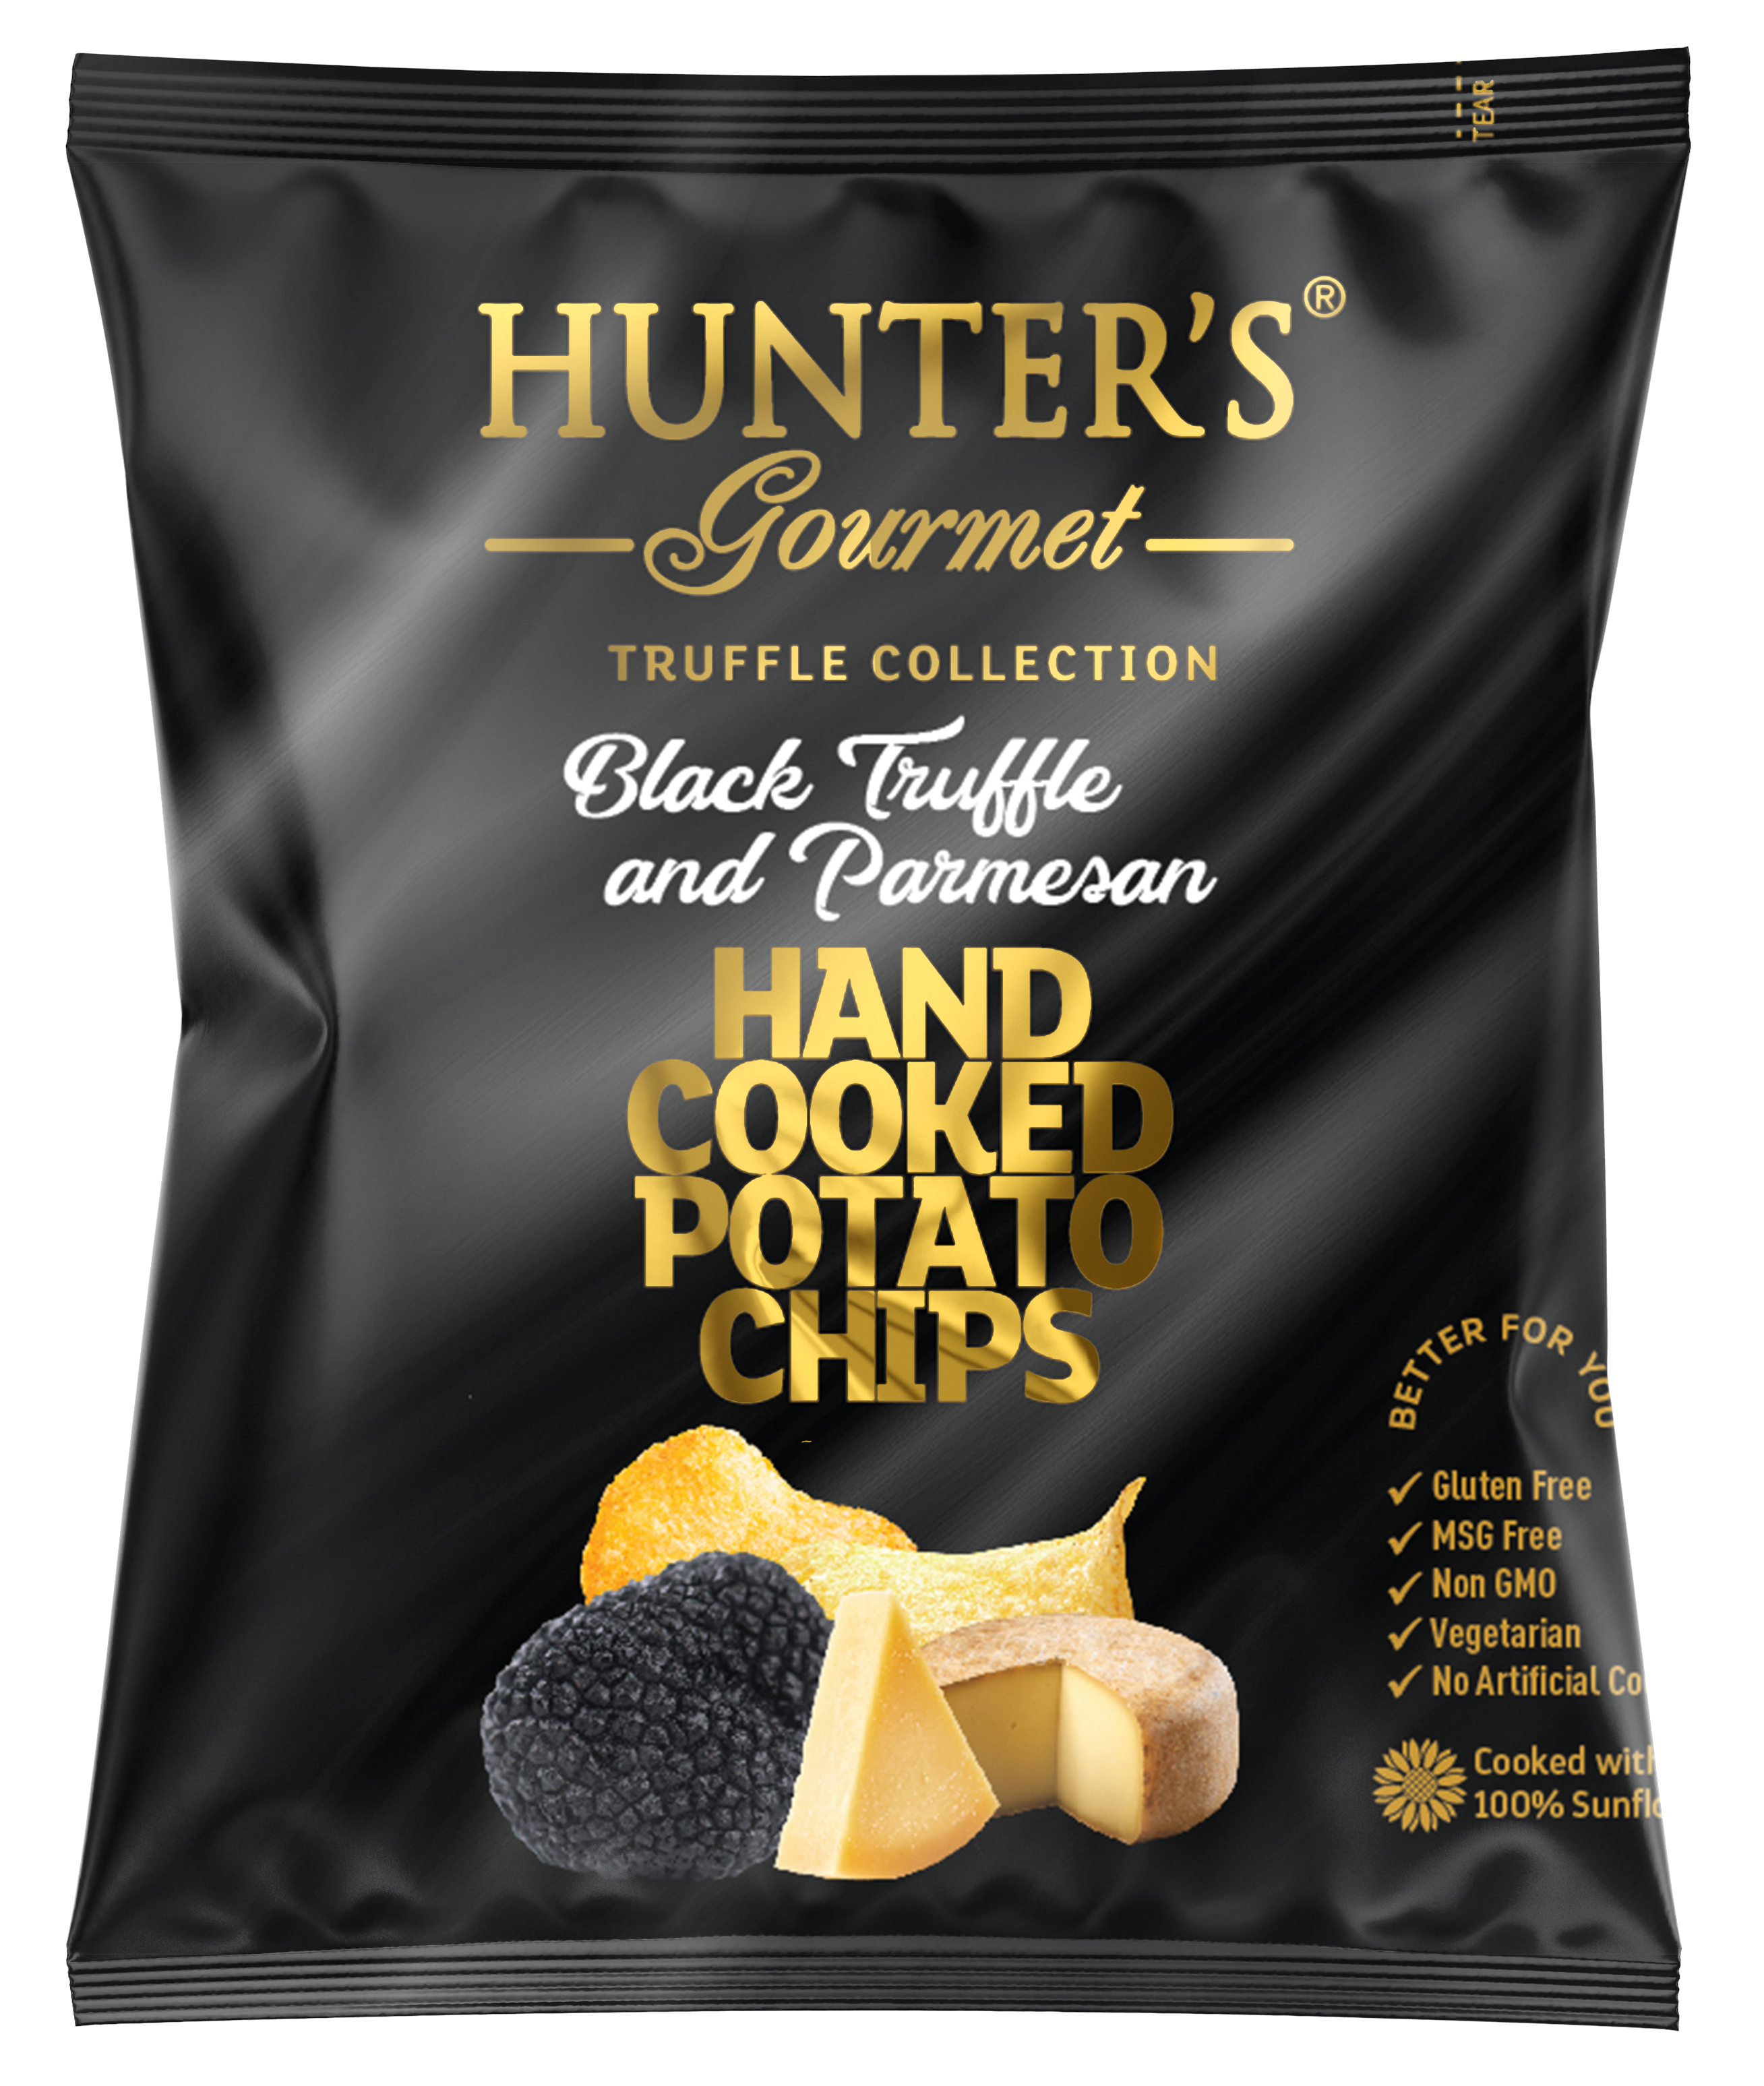 Hunter's Gourmet Hand Cooked Potato Chips Black Truffle and Parmesan 50 units per case 25 g